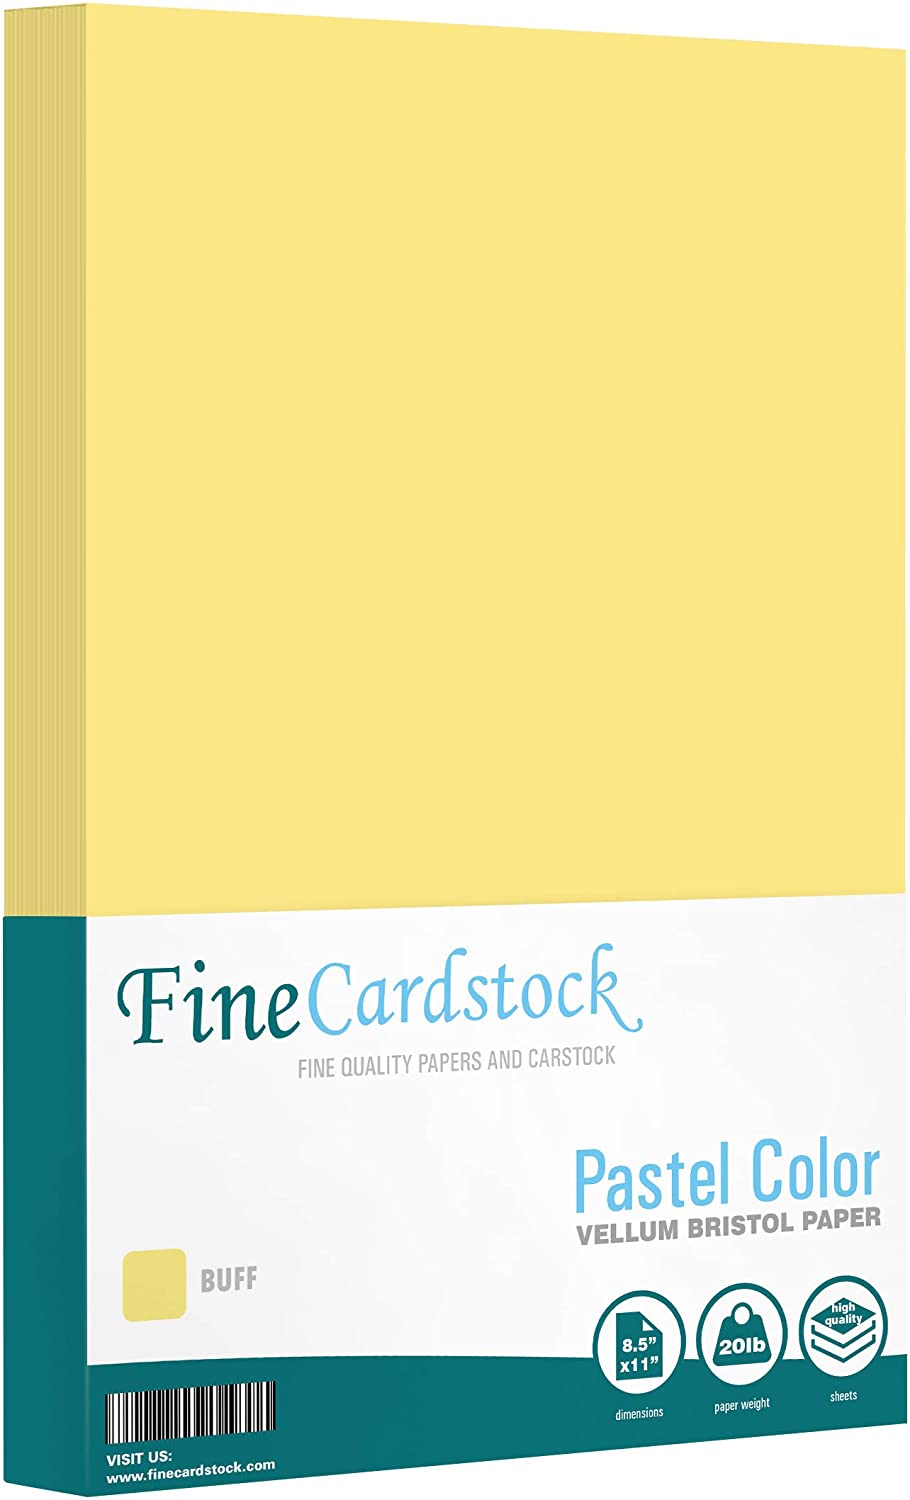 8.5 x 14” Pastel Color Paper – Great for Cards and Stationery Printing | Legal, Menu Size | Lightweight 20lb Paper | 100 Sheets | Buff - image 1 of 6